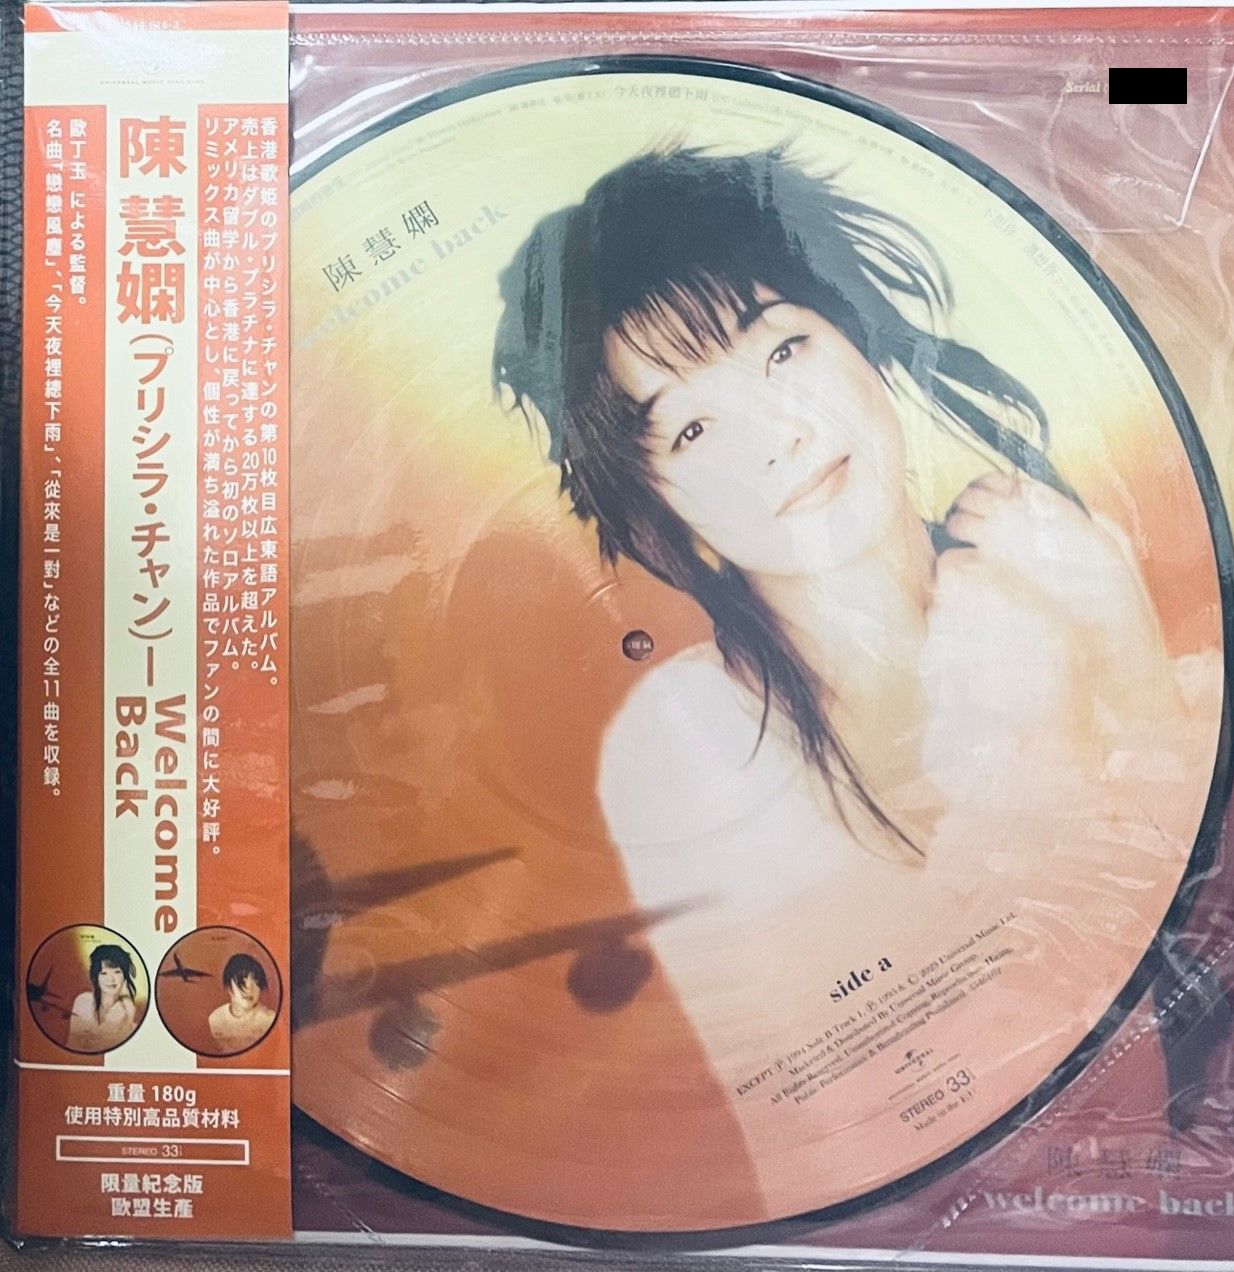 PRISCILLA CHAN - 陳慧嫻 WELCOME BACK (PICTURE VINYL) MADE IN EU